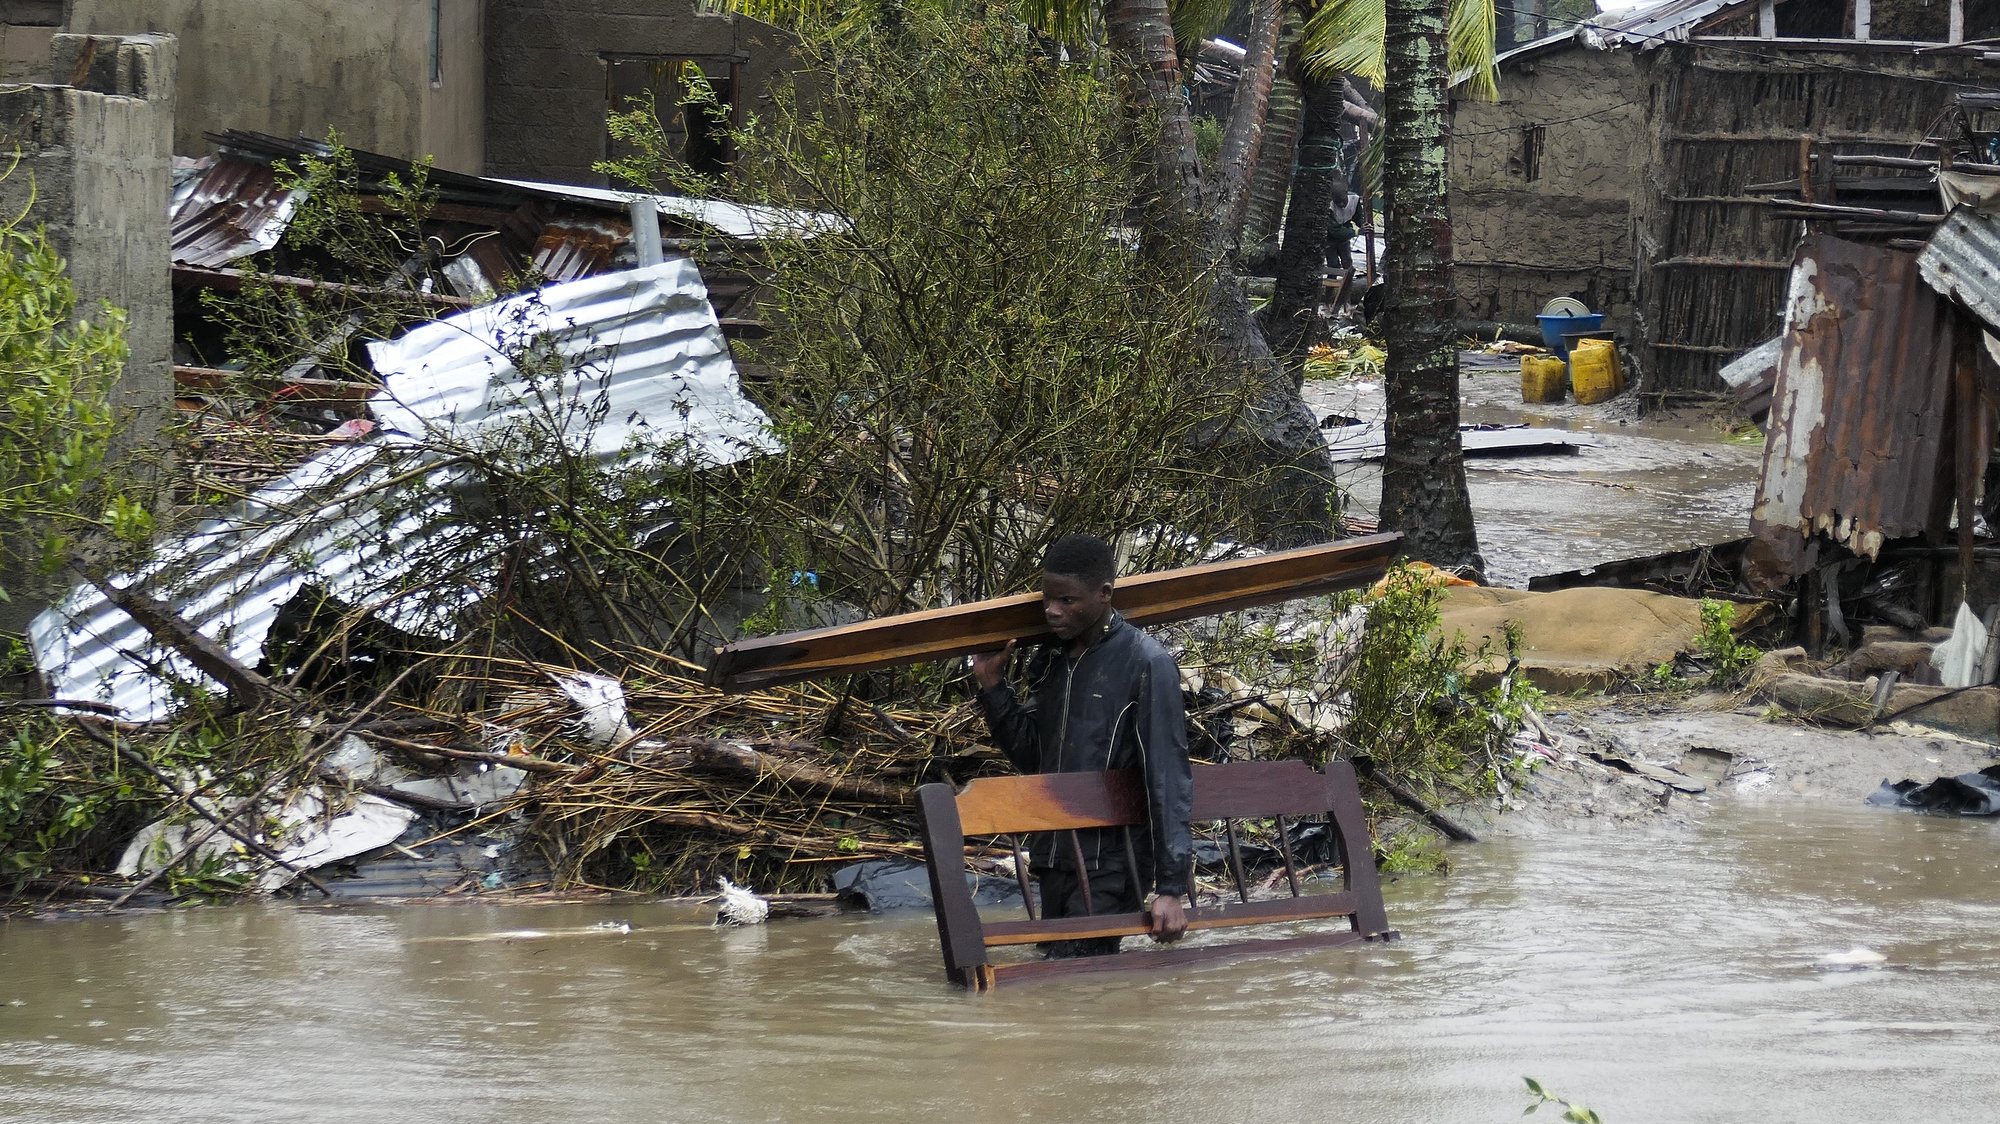 A man collects some wood on a flooded street near Quelimane, as the storm Freddy hits Mozambique, 12 March 2023. The provincial capital of Quelimane will be the largest urban area closest to the cyclone&#039;s point of arrival on the mainland, and its radius (of about 300 kilometres) is expected to extend from Marromeu to Pebane, then moving inland towards Cherimane and southern Malawi. This is one of the longest lasting storms ever, after it formed at the beginning of February in the Asian seas, crossing the entire Indian Ocean to the east African coast. ANDRE CATUEIRA/LUSA